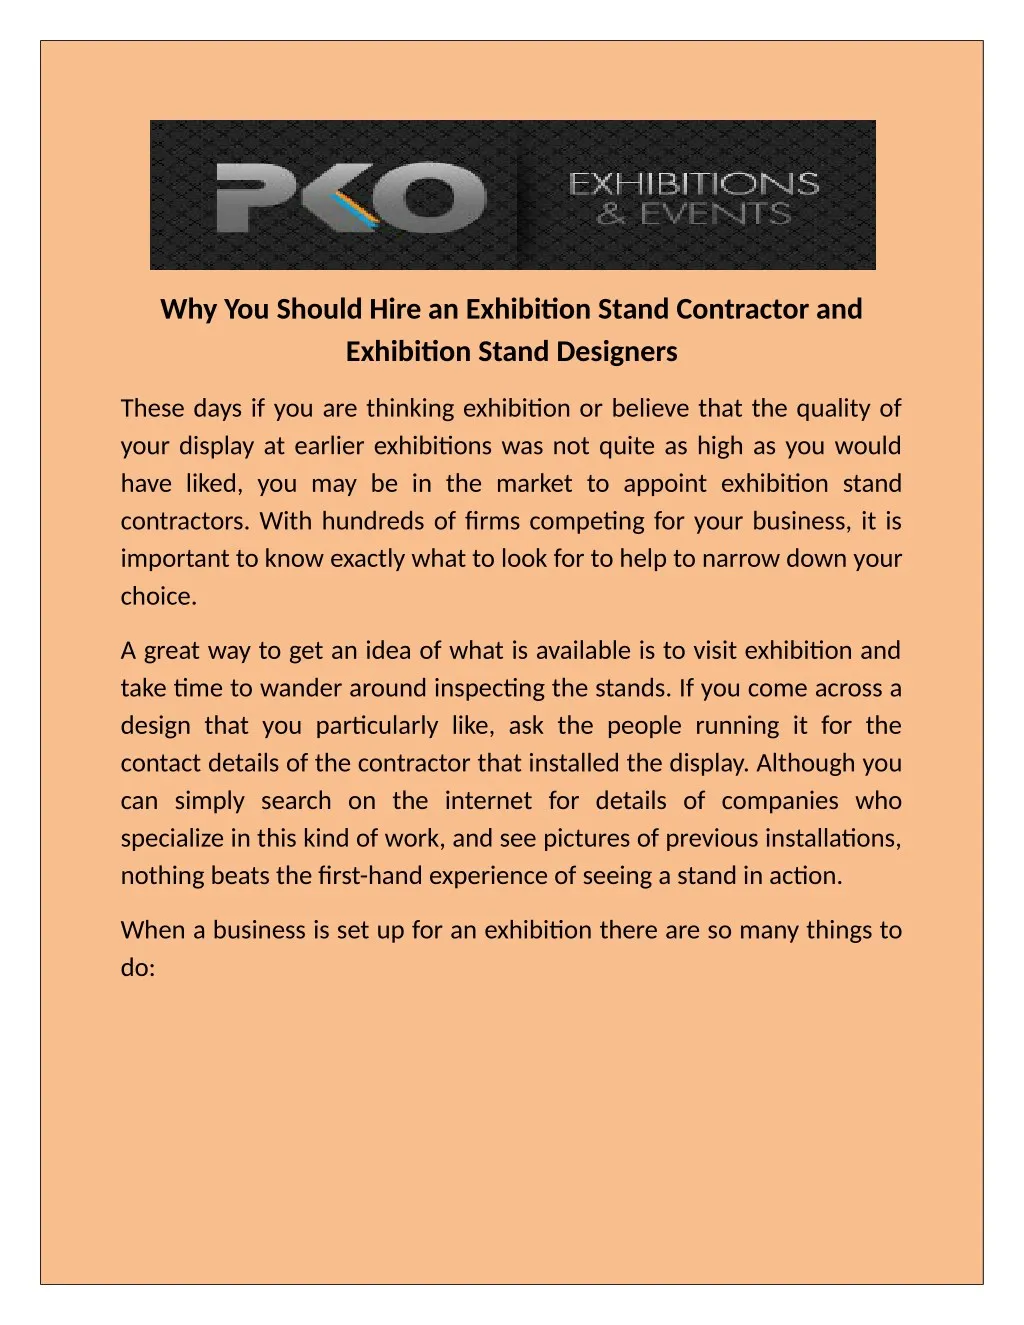 why you should hire an exhibition stand